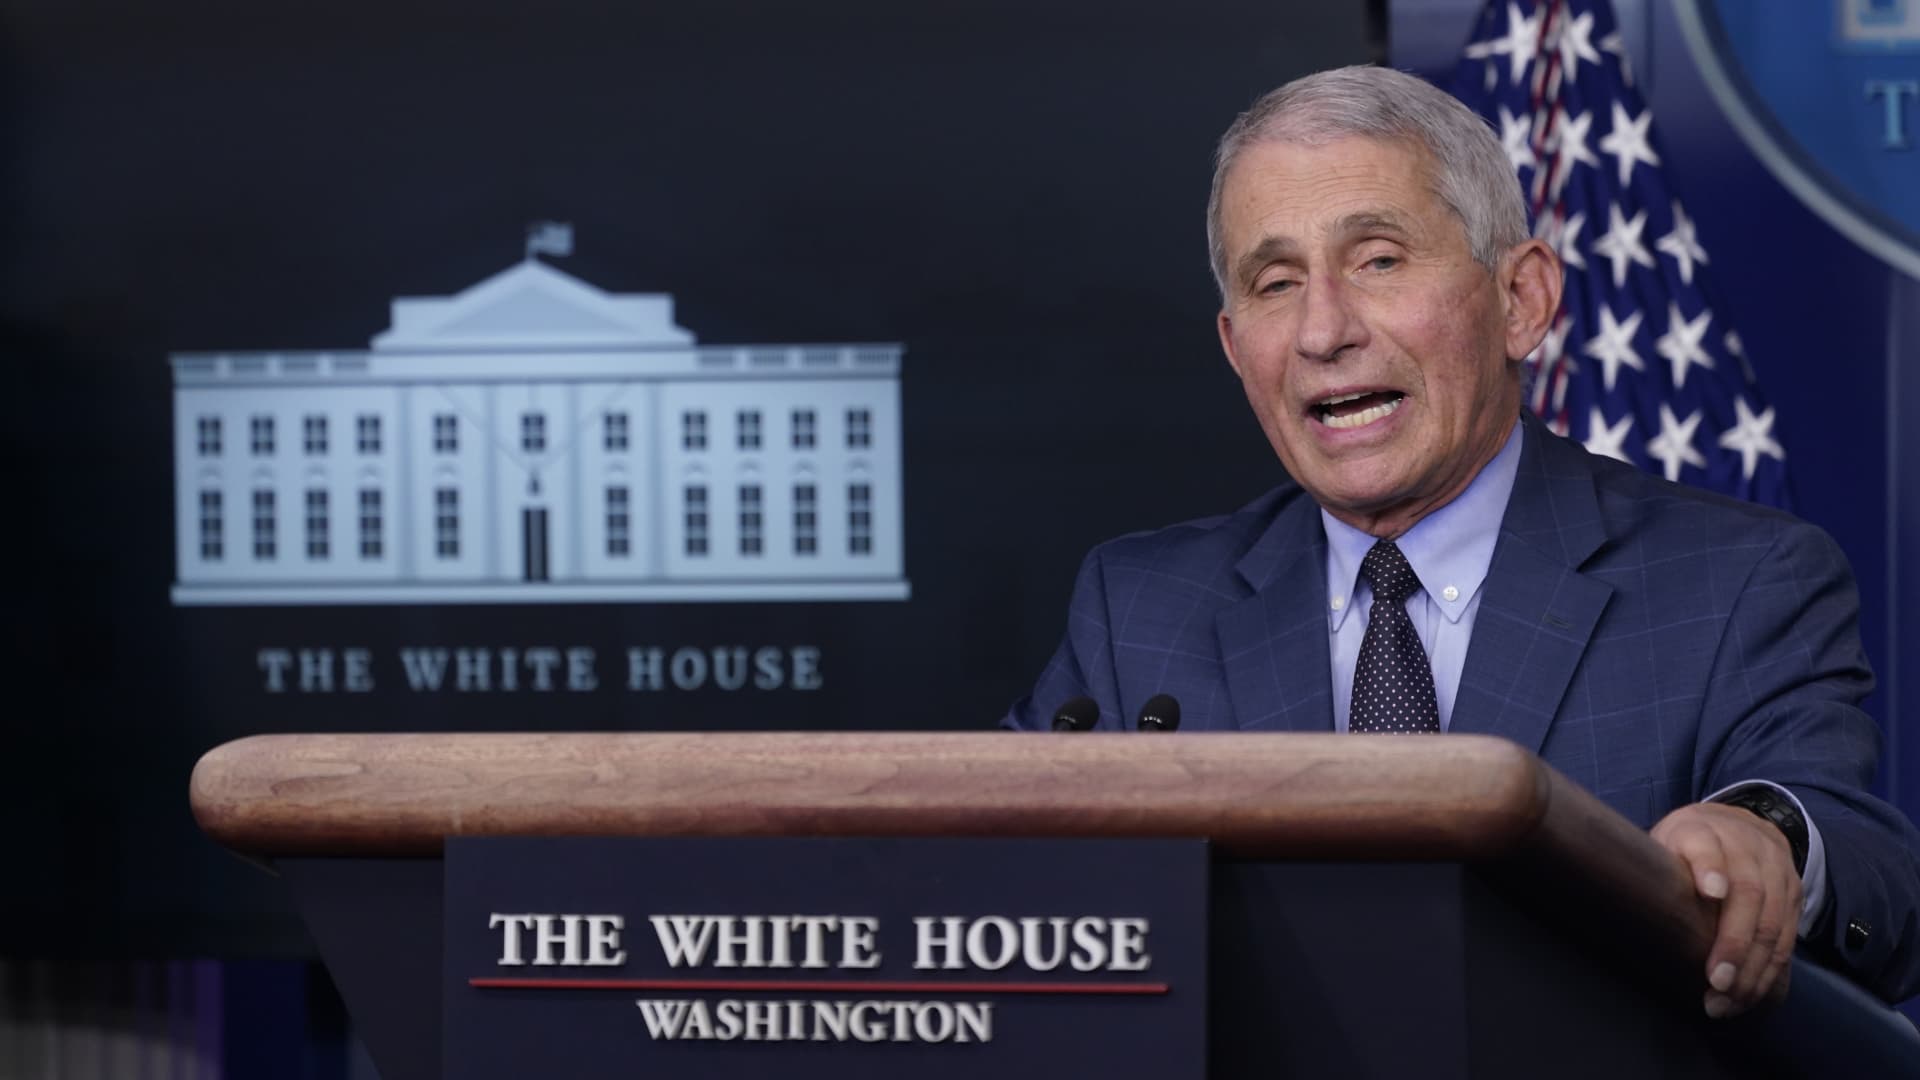 Anthony Fauci, director of the National Institute of Allergy and Infectious Diseases, speaks during a news conference in the White House in Washington, D.C., U.S., on Thursday, Nov. 19, 2020.